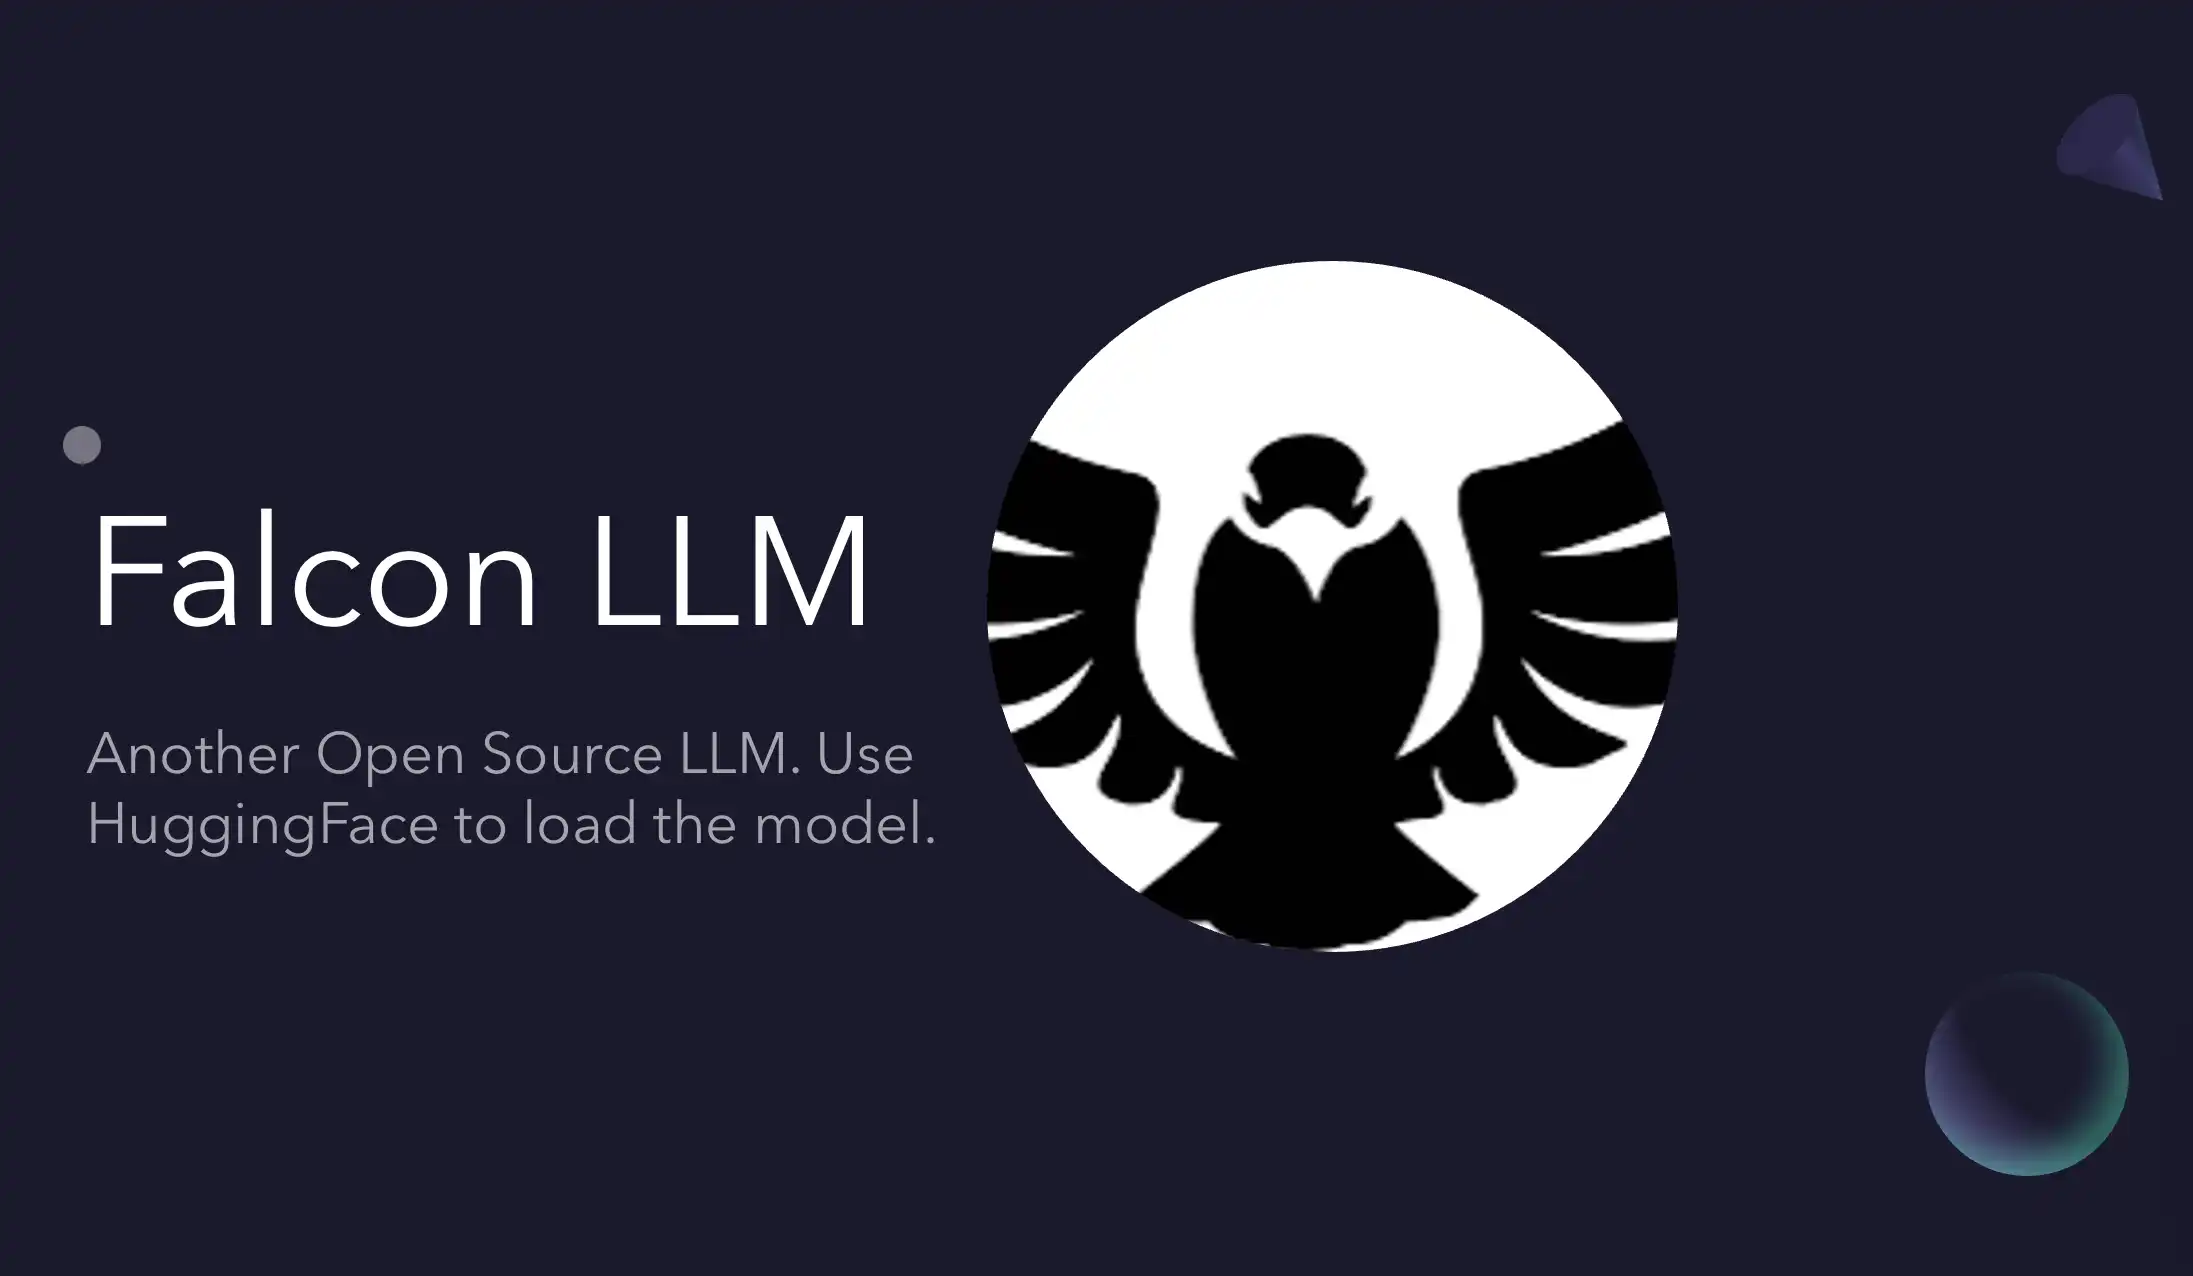 Benefits of Using Falcon LLM for Businesses